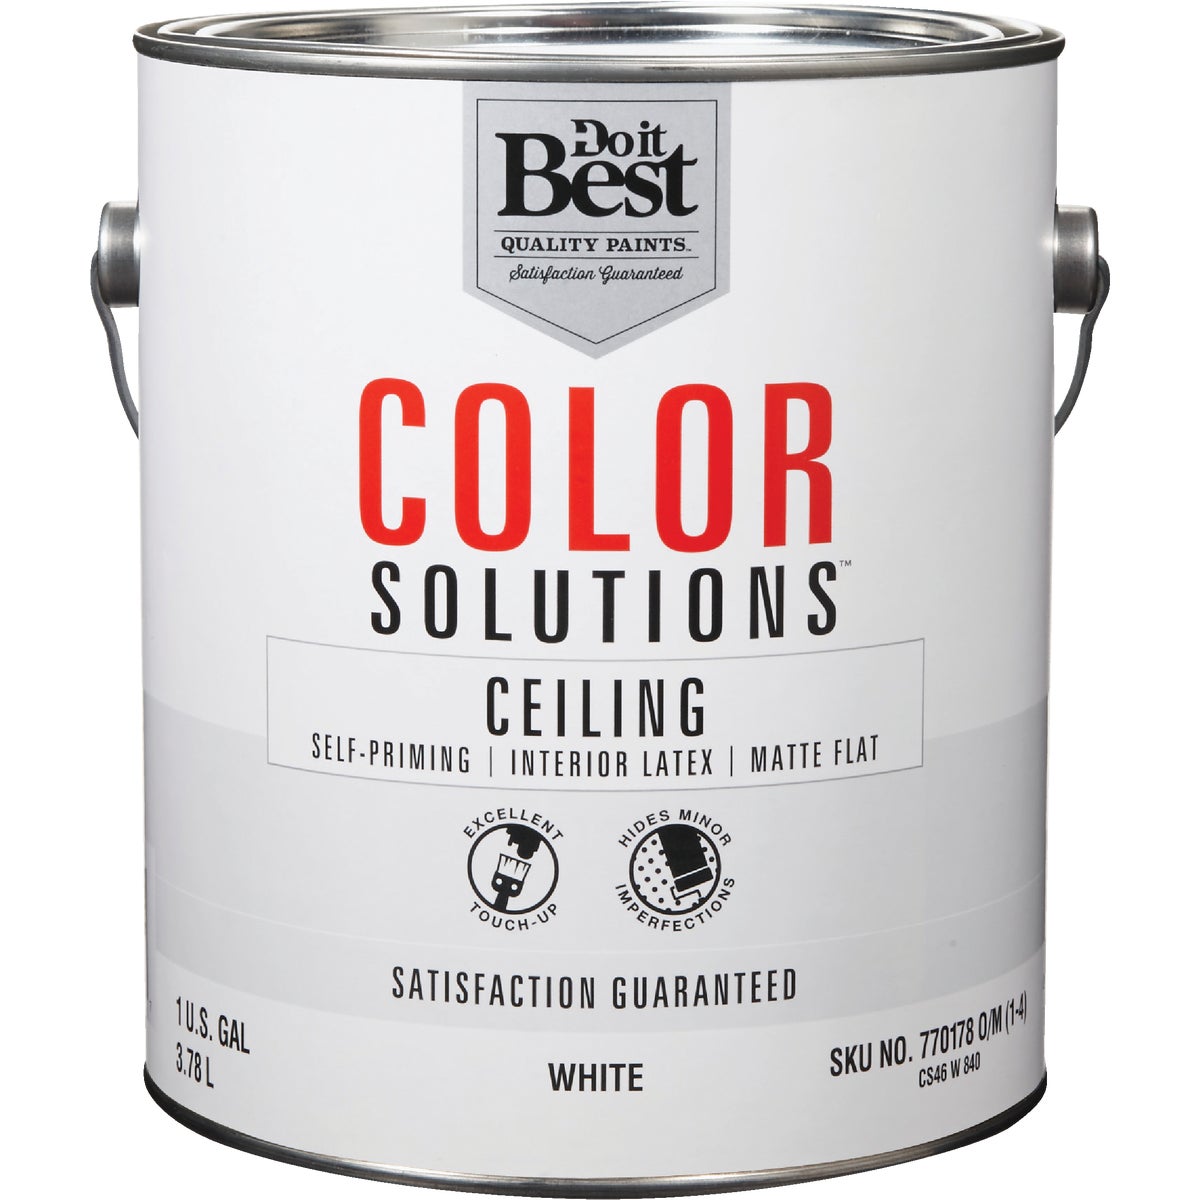 Item 770178, Self-priming ceiling paint provides long-term durability that is washable 